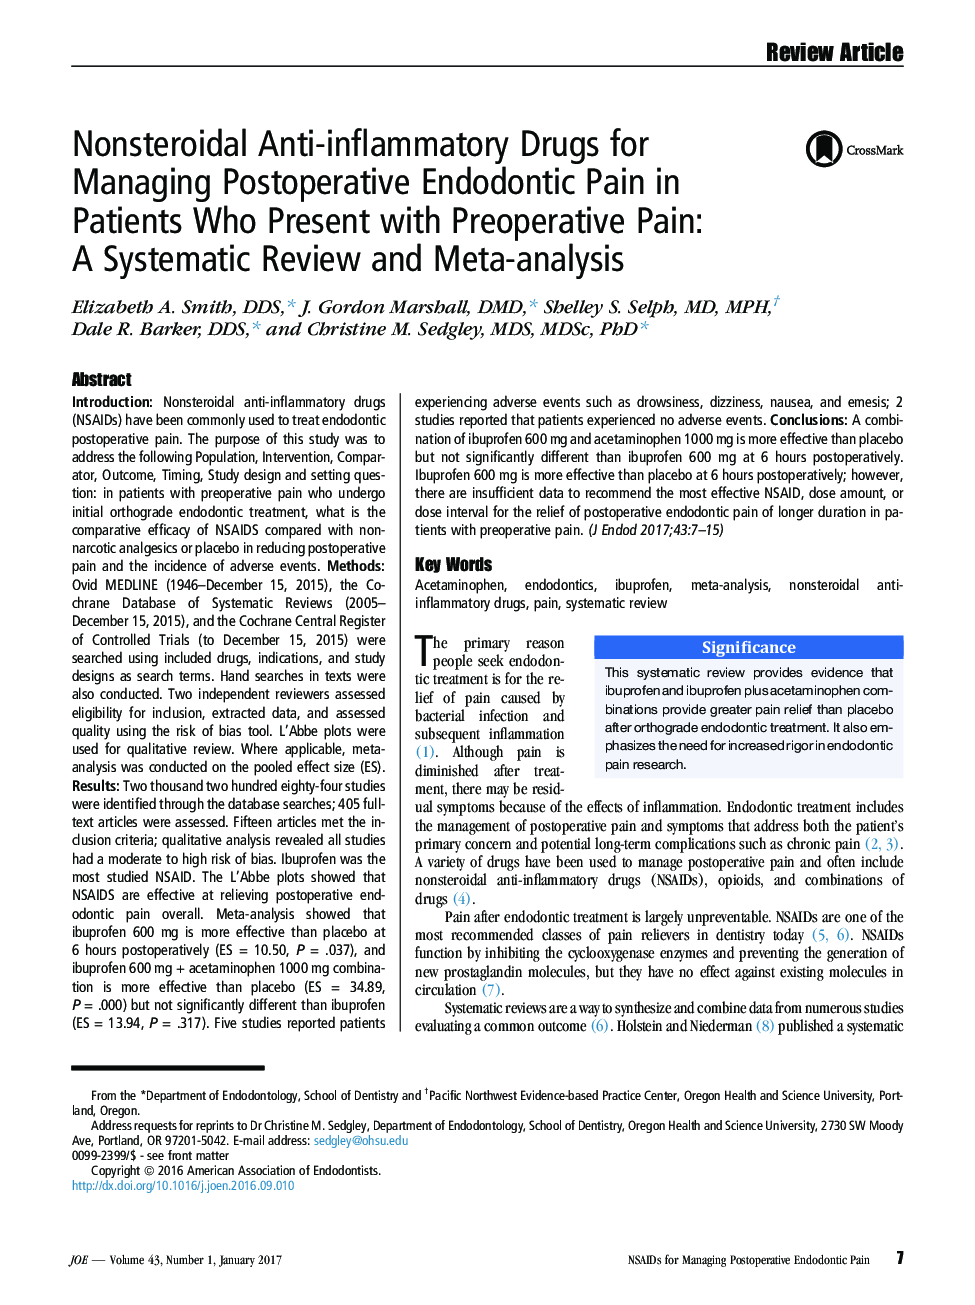 Nonsteroidal Anti-inflammatory Drugs for Managing Postoperative Endodontic Pain in Patients Who Present with Preoperative Pain: AÂ Systematic Review and Meta-analysis